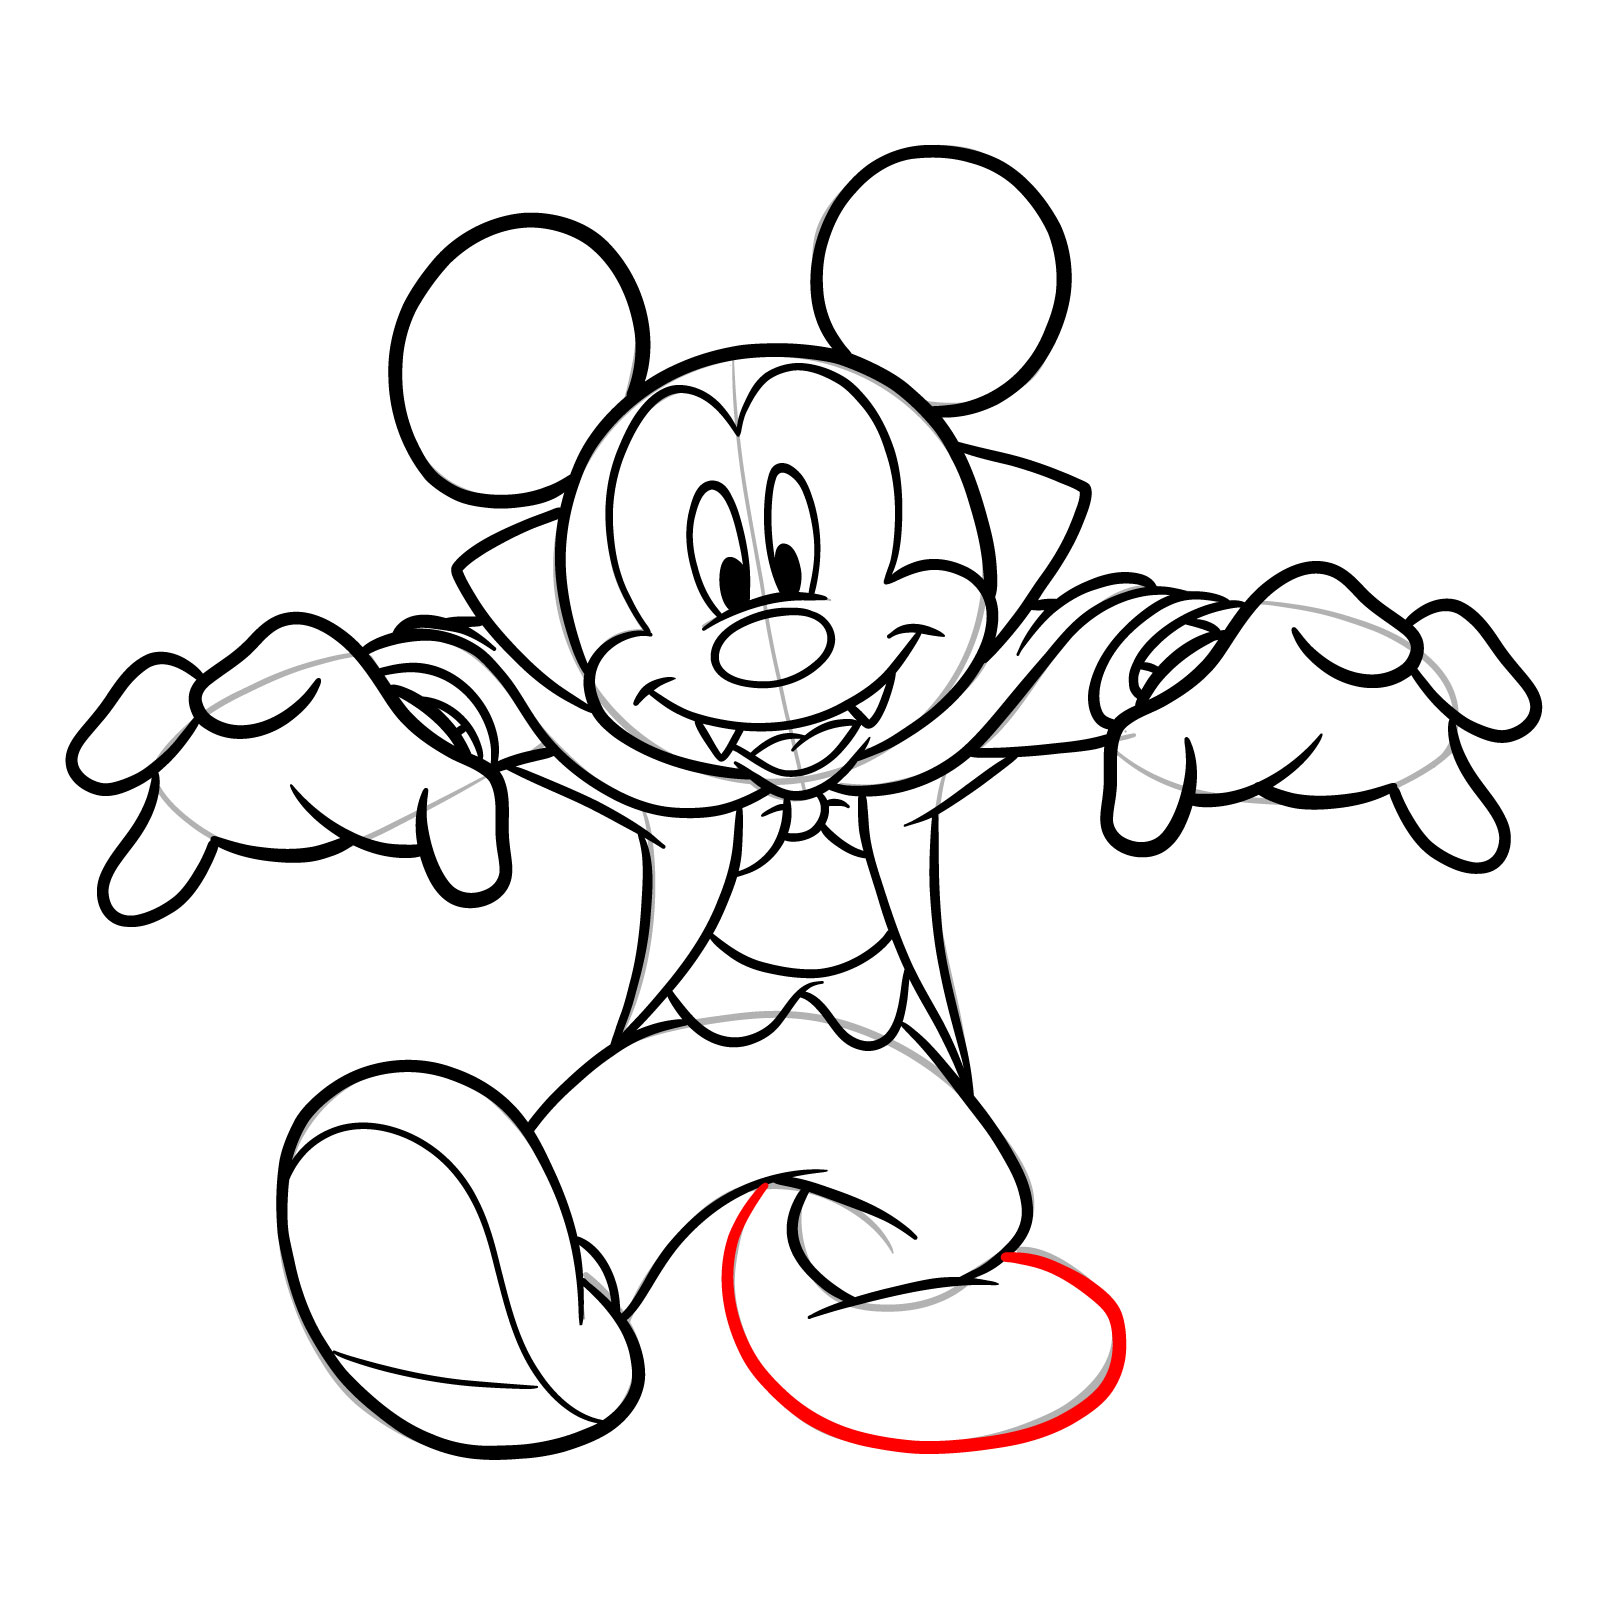 How to draw Dracula Mickey Mouse - step 25